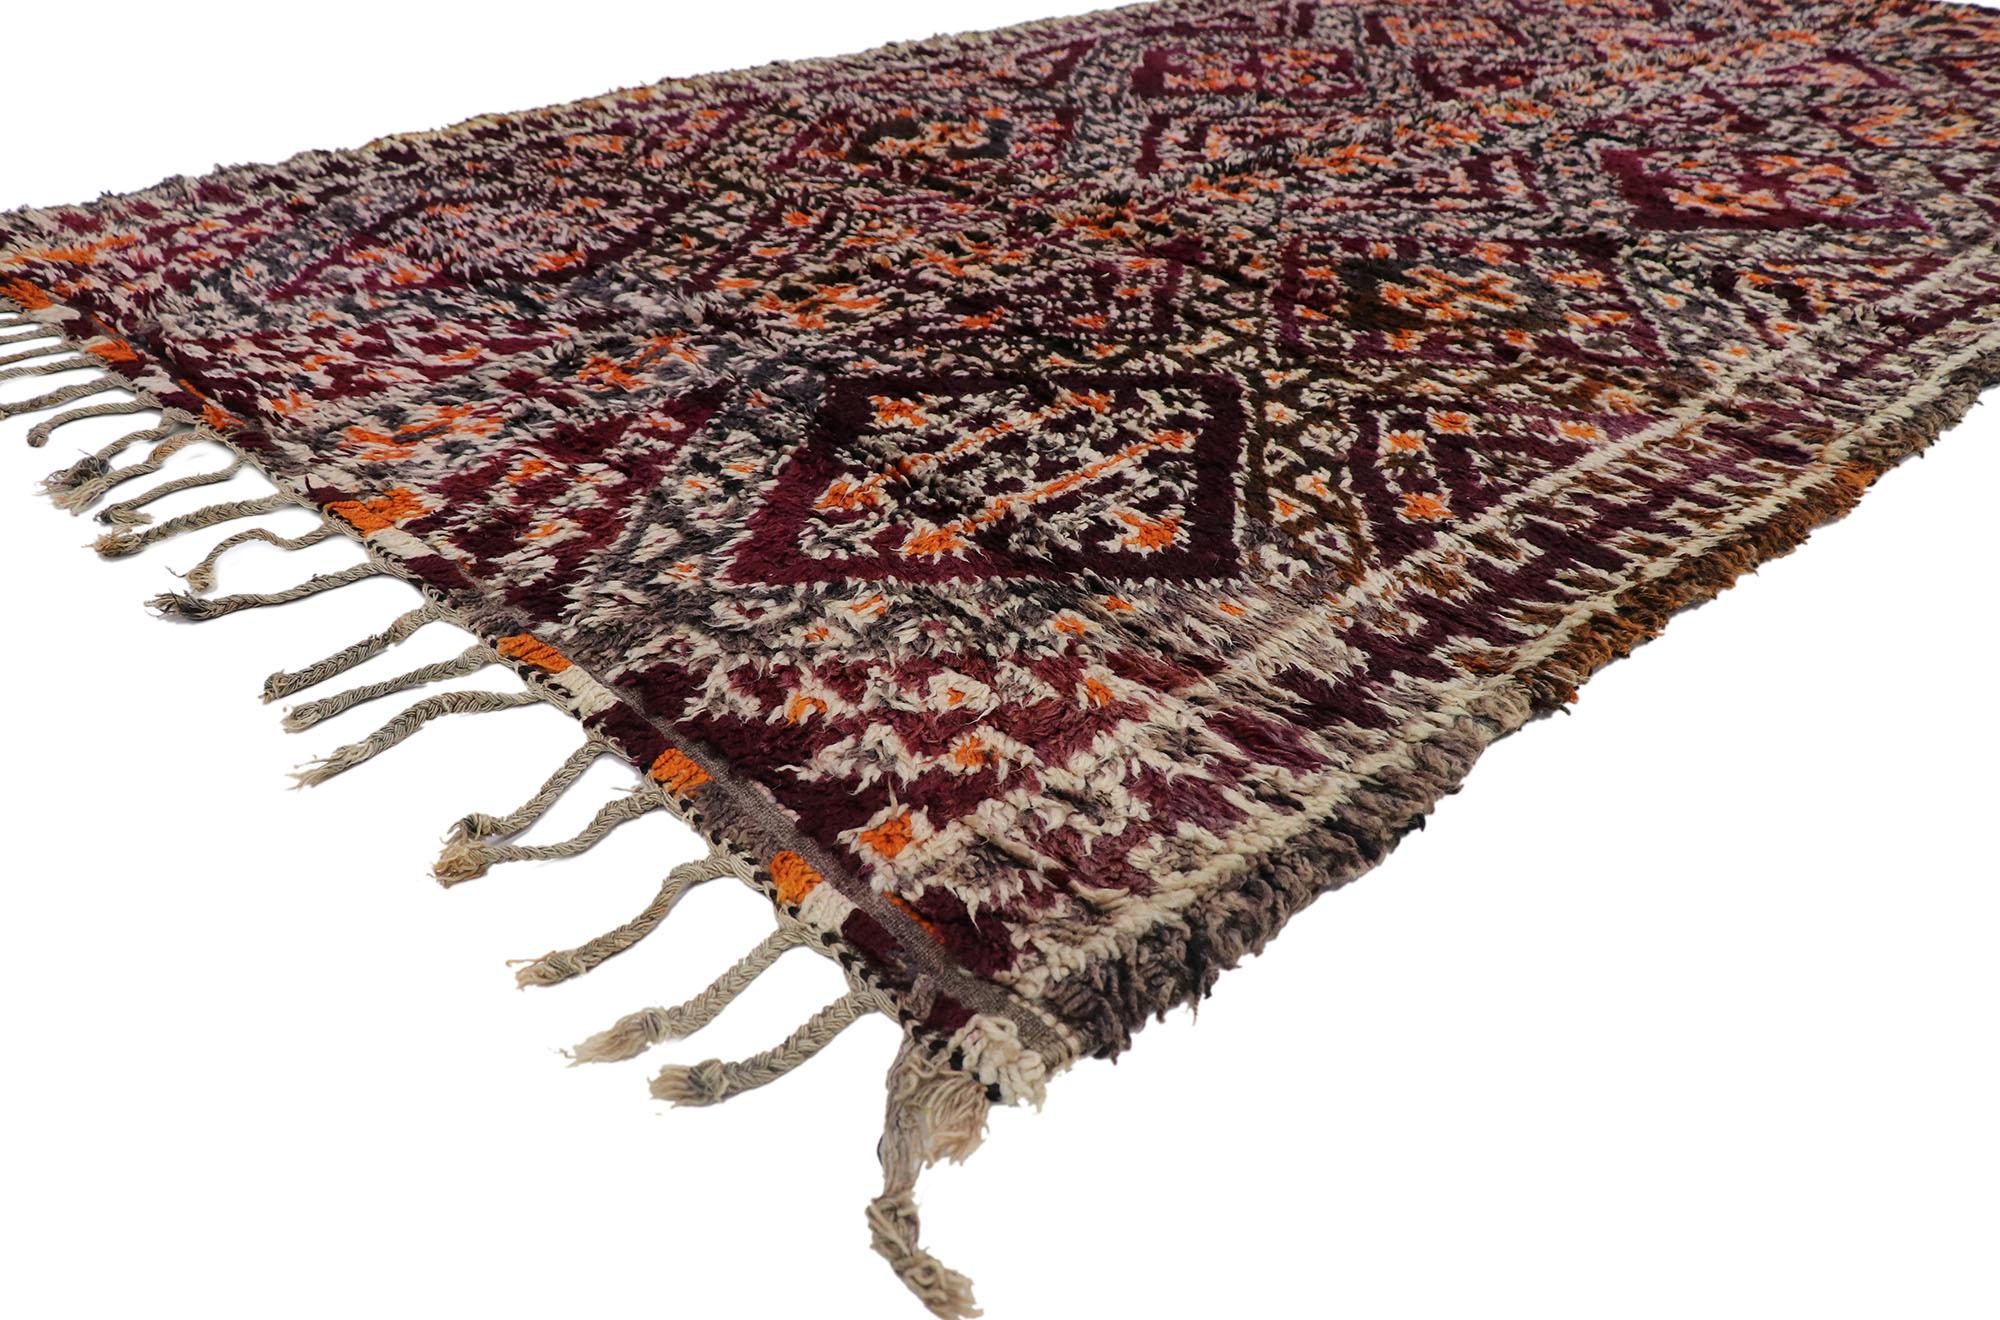 21304 Vintage Berber Beni M'Guild Moroccan rug with Bohemian Tribal Style 05'10 x 11'07. Showcasing a bold expressive design, incredible detail and texture, this hand knotted wool vintage Berber Beni M'Guild Moroccan rug is a captivating vision of